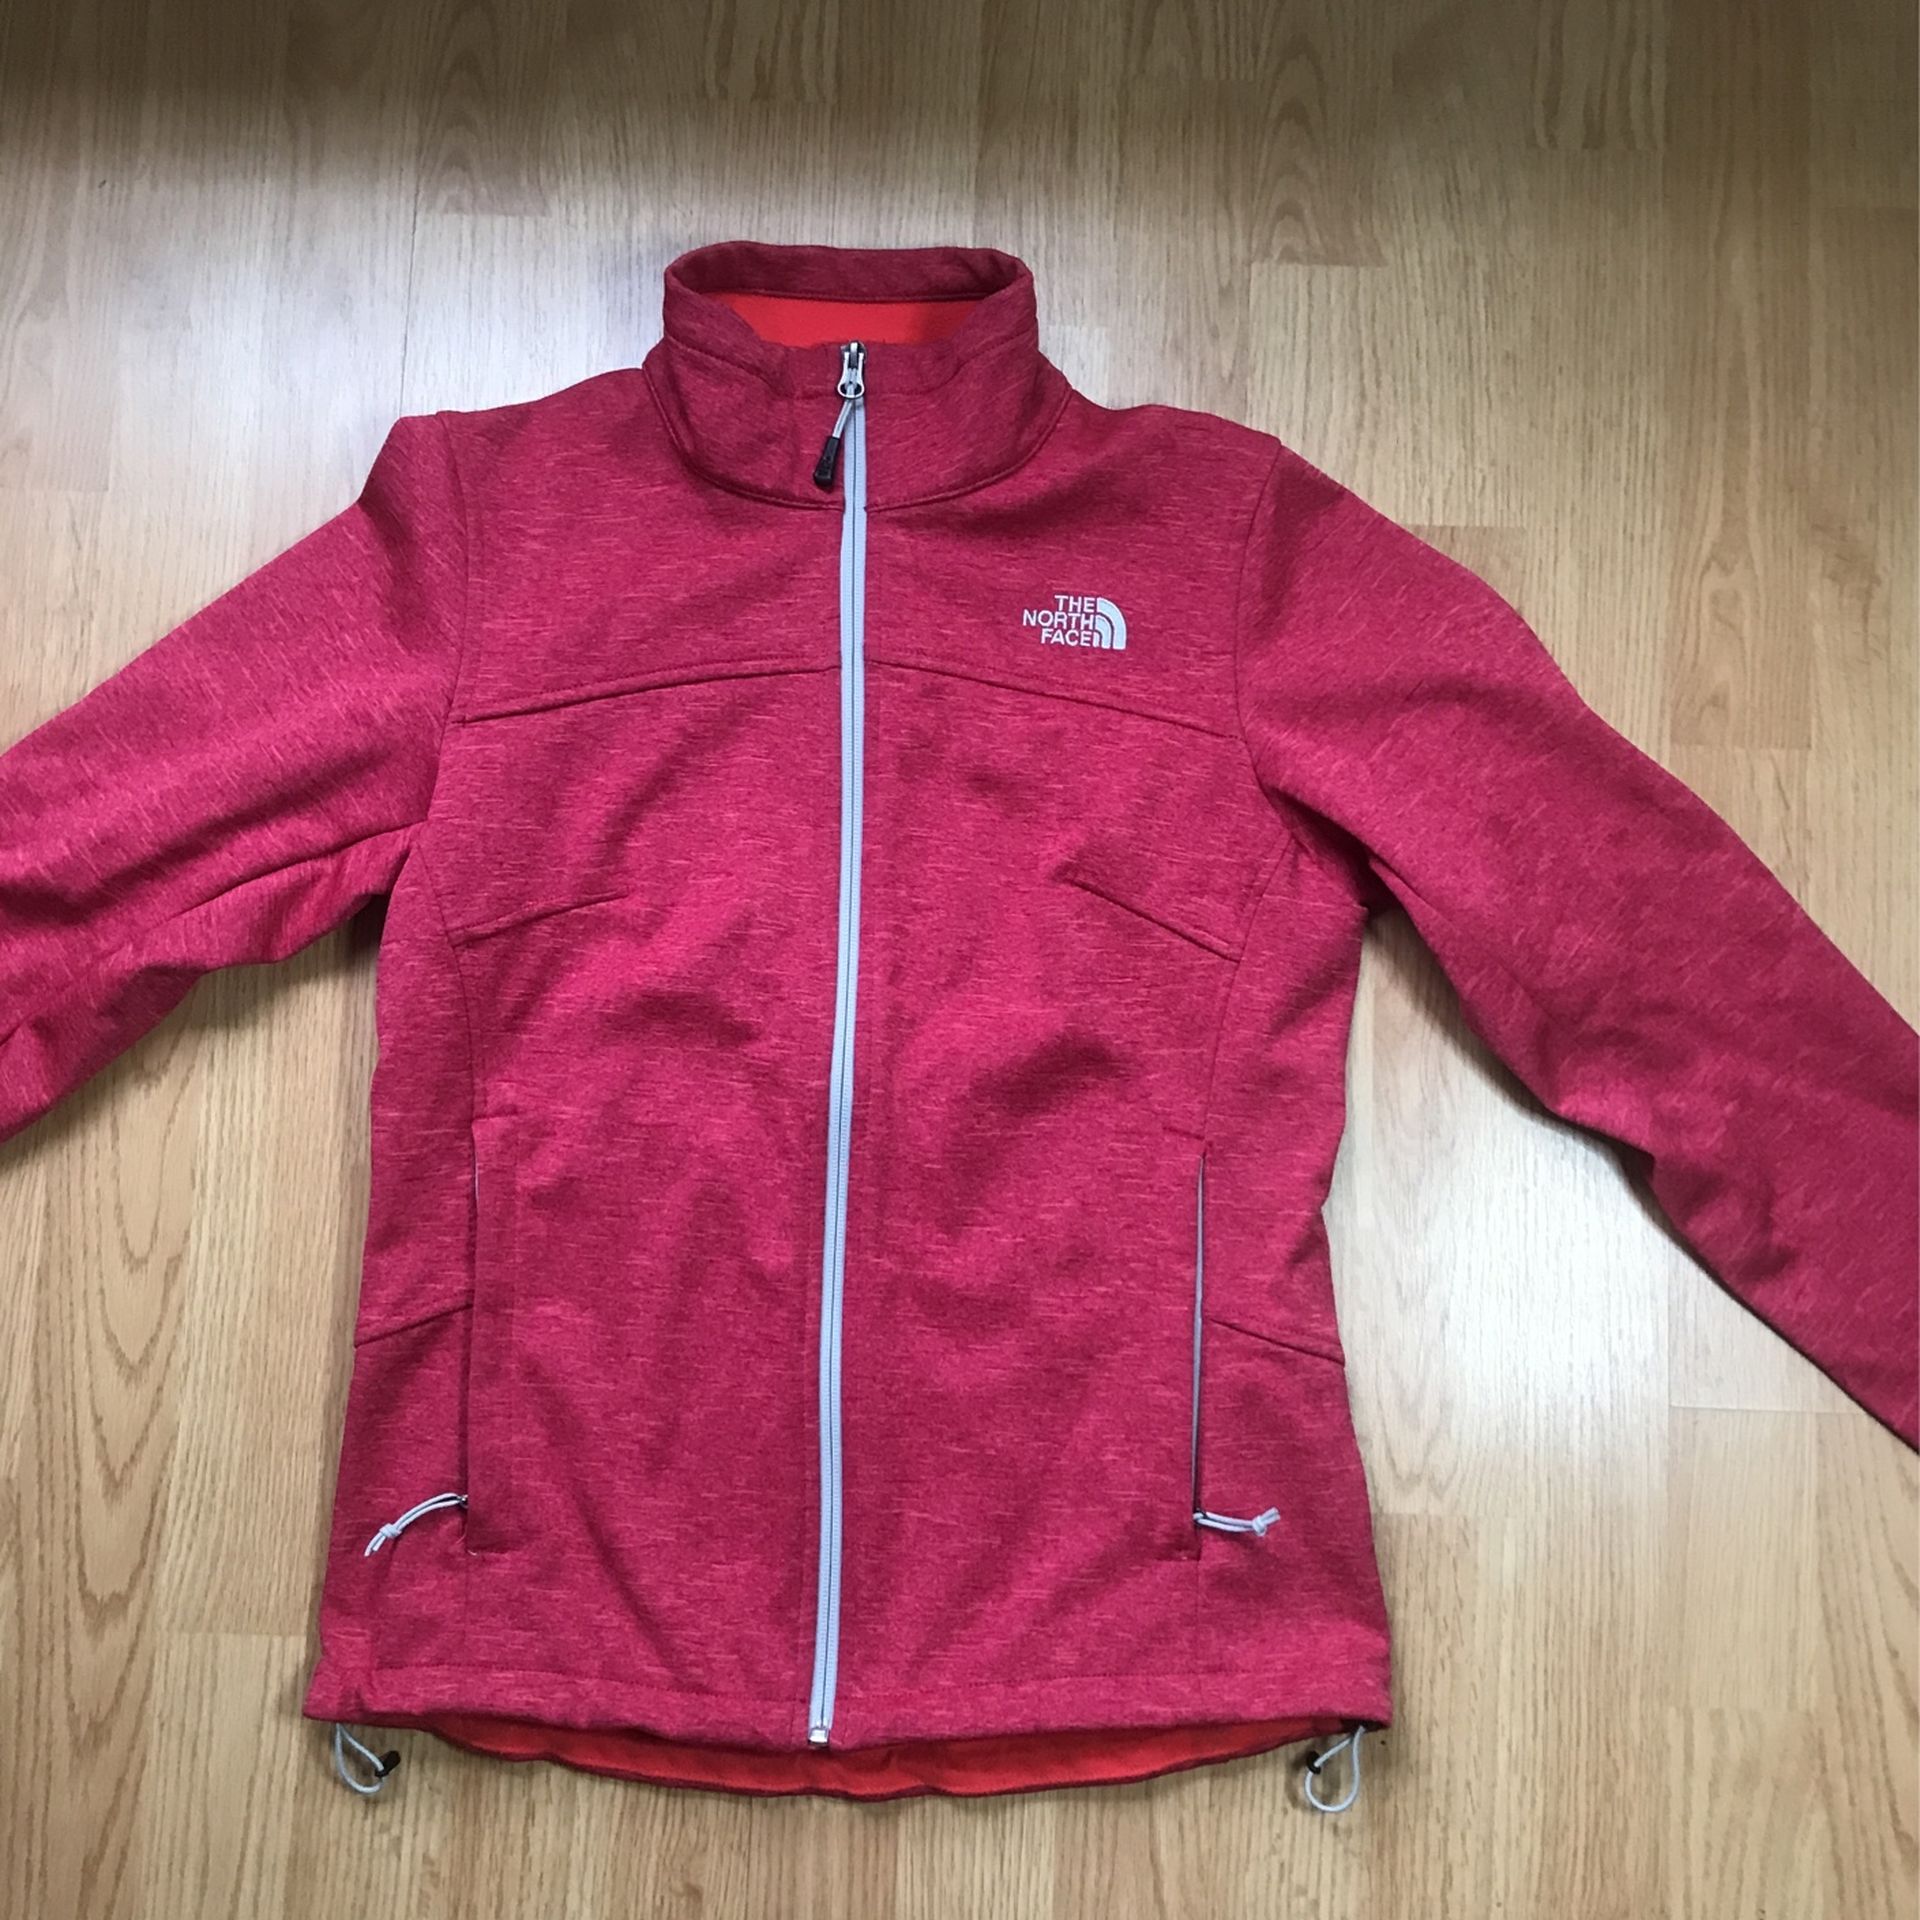 The North Face Light Weight Womens Jacket